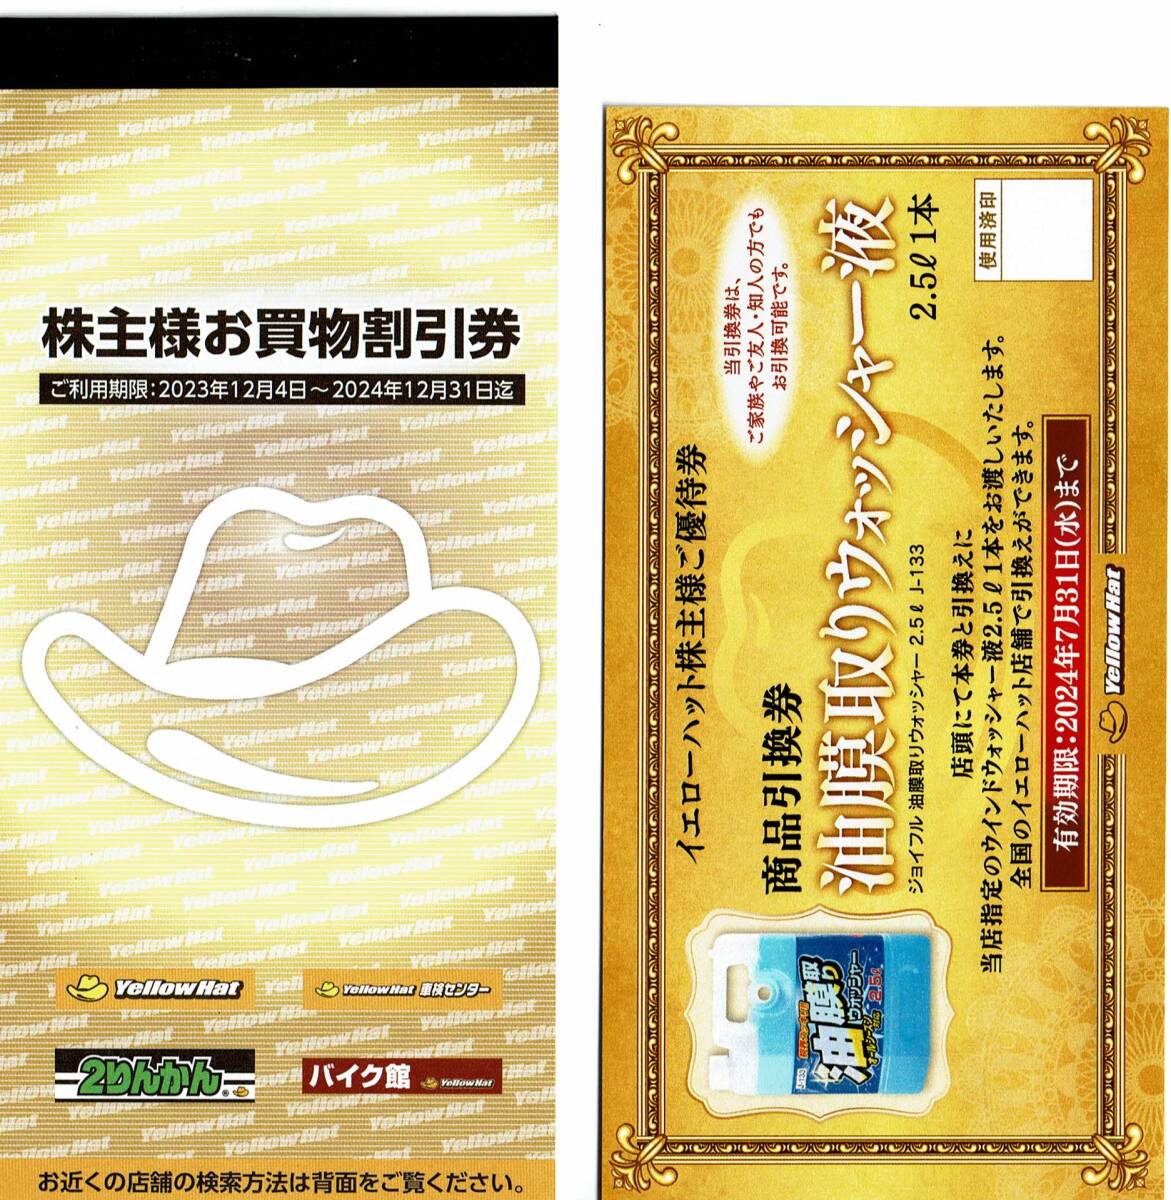 [ yellow hat stockholder hospitality ]. buying thing discount ticket 7500 jpy minute (300 jpy ticket × 25 sheets ..)[1 pcs. ] have efficacy time limit 2024 year 12 month 31 day 